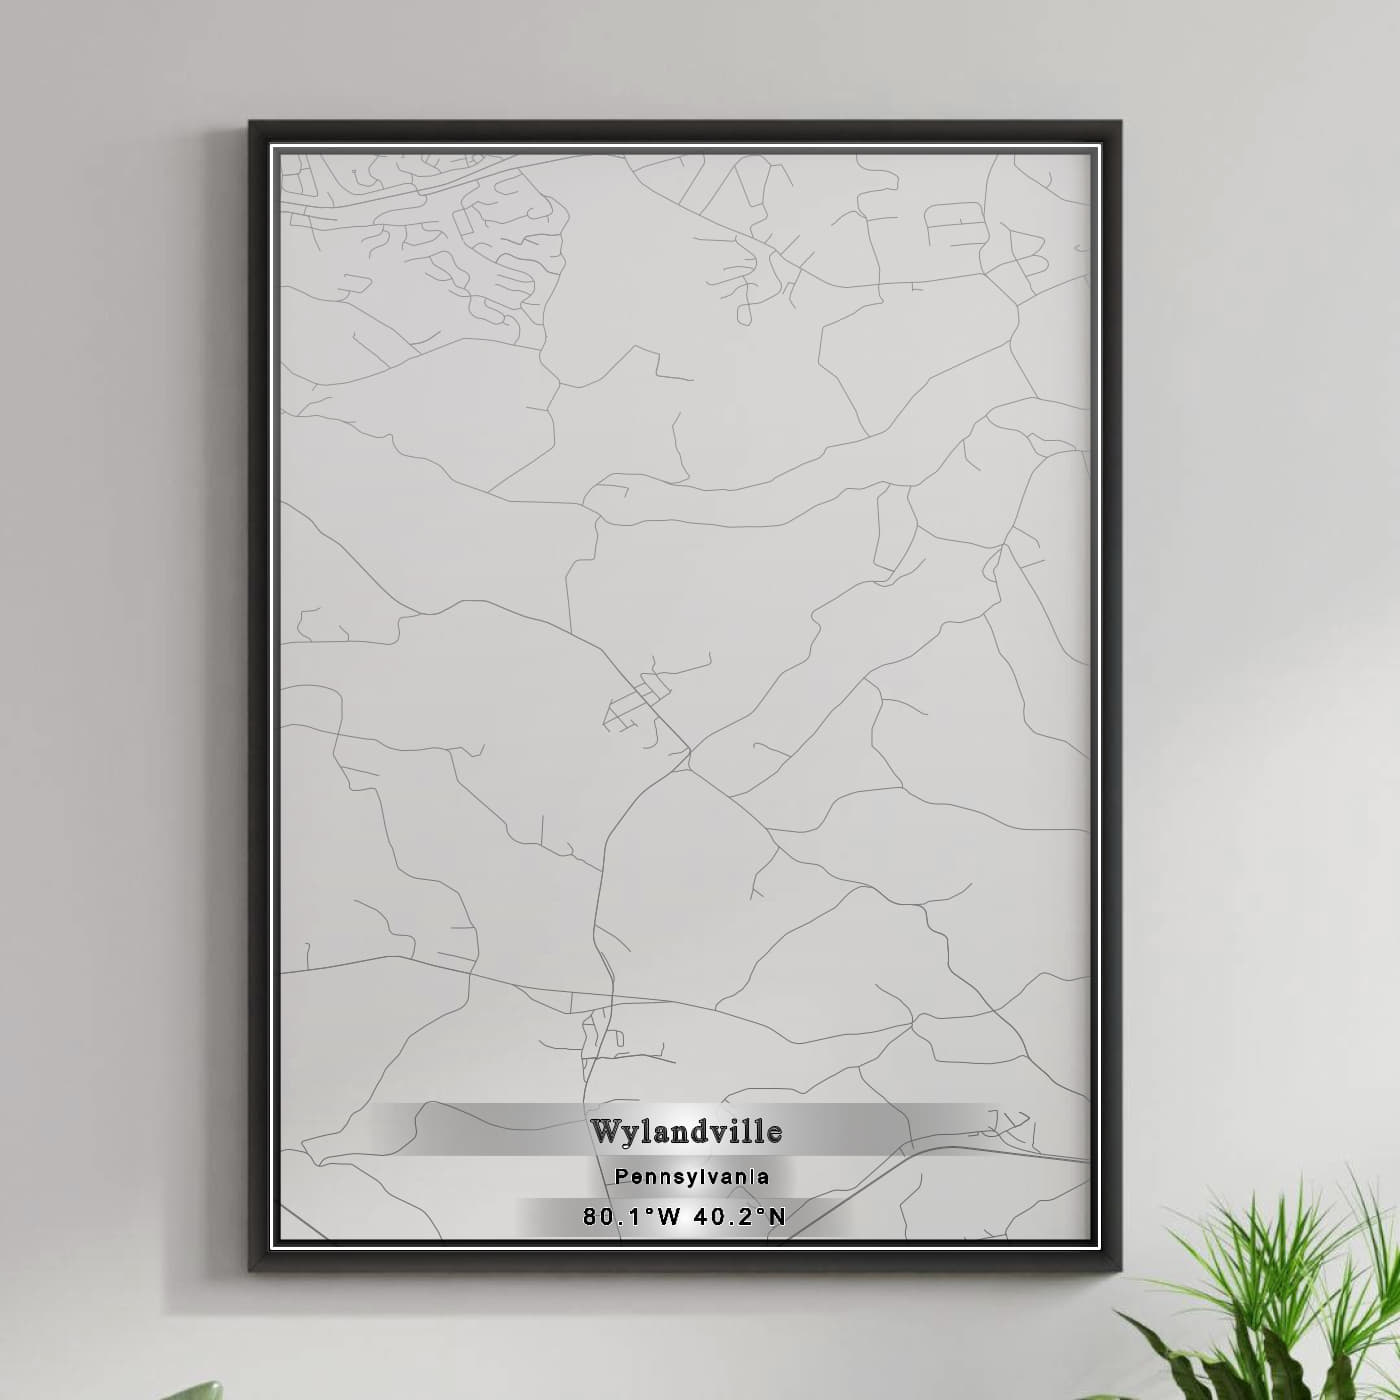 ROAD MAP OF WYLANDVILLE, PENNSYLVANIA BY MAPBAKES